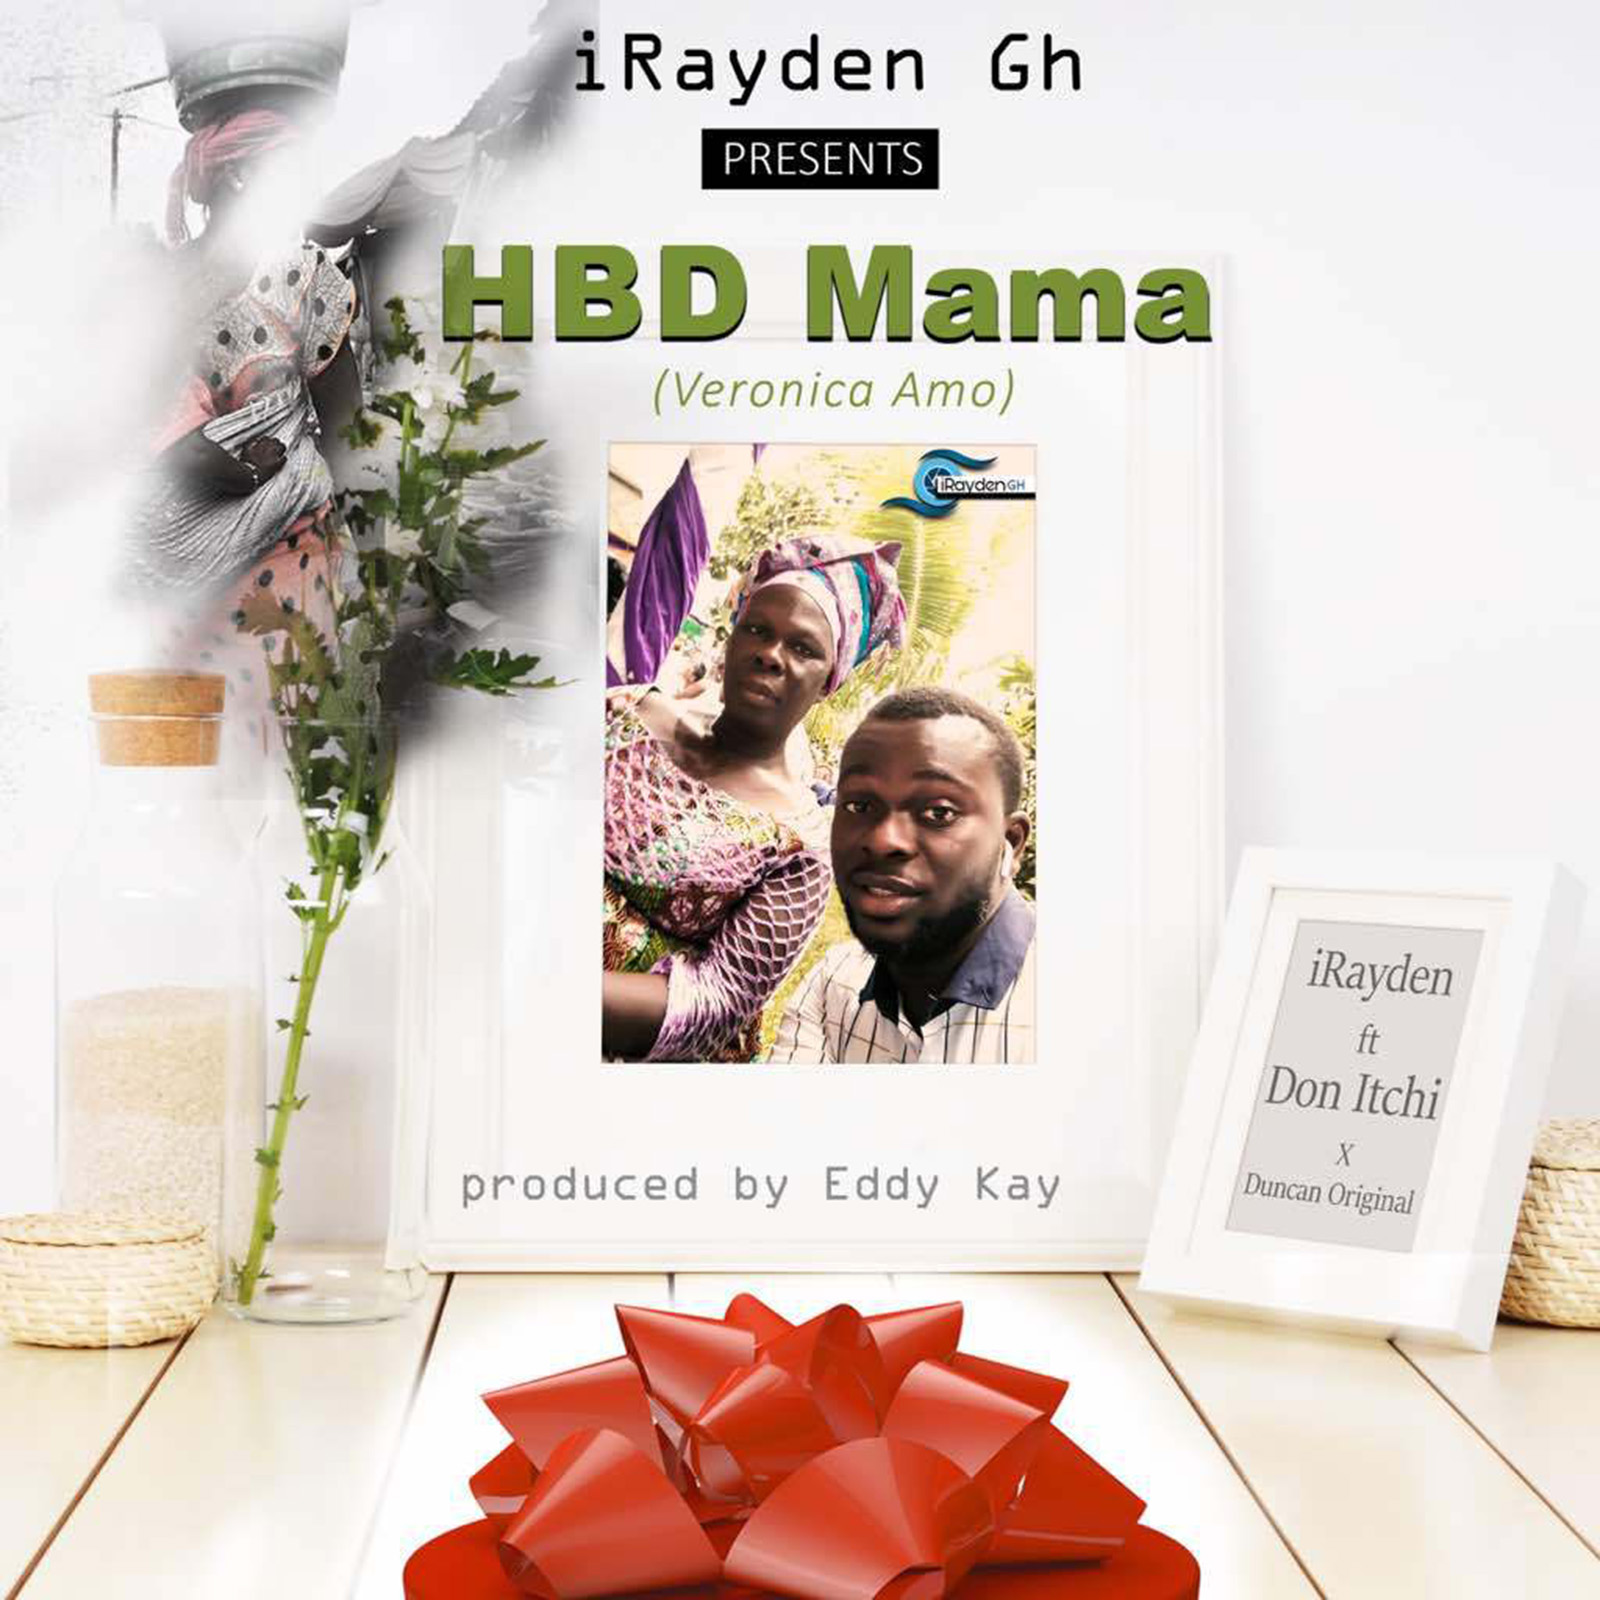 HBD Mama by iRayden feat. Don Itchi